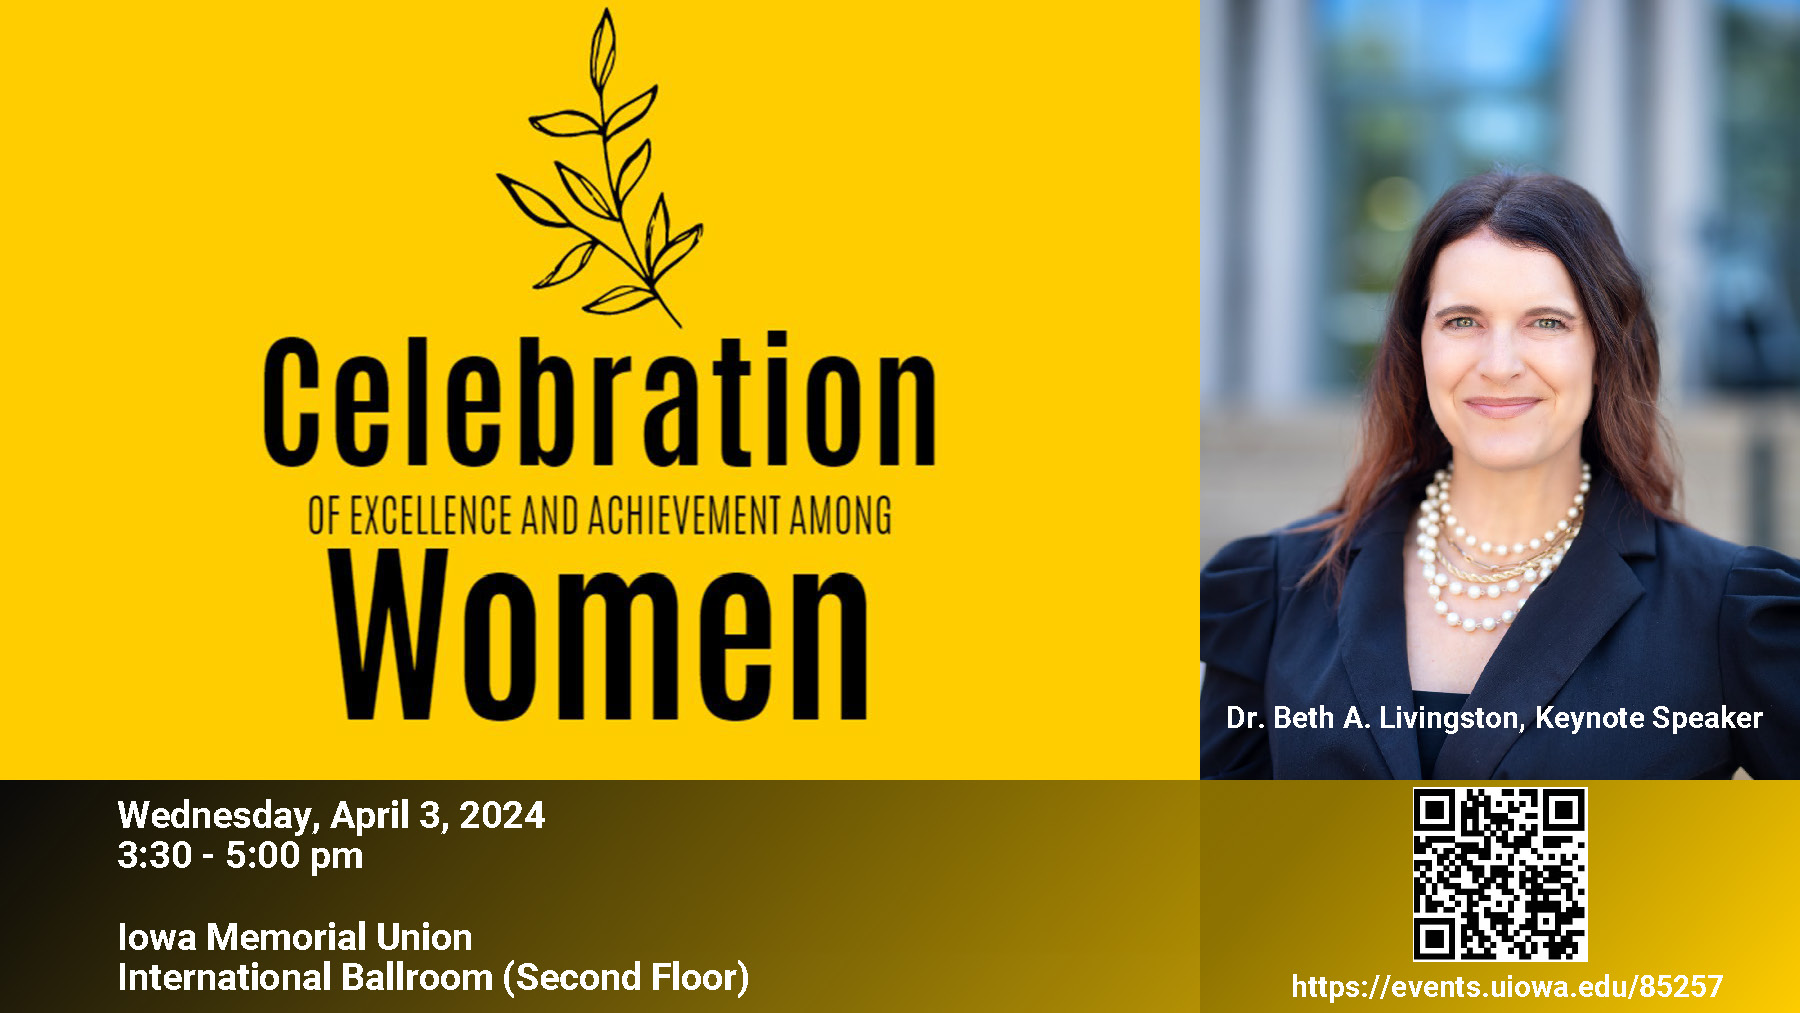 Celebration of Excellence among Women